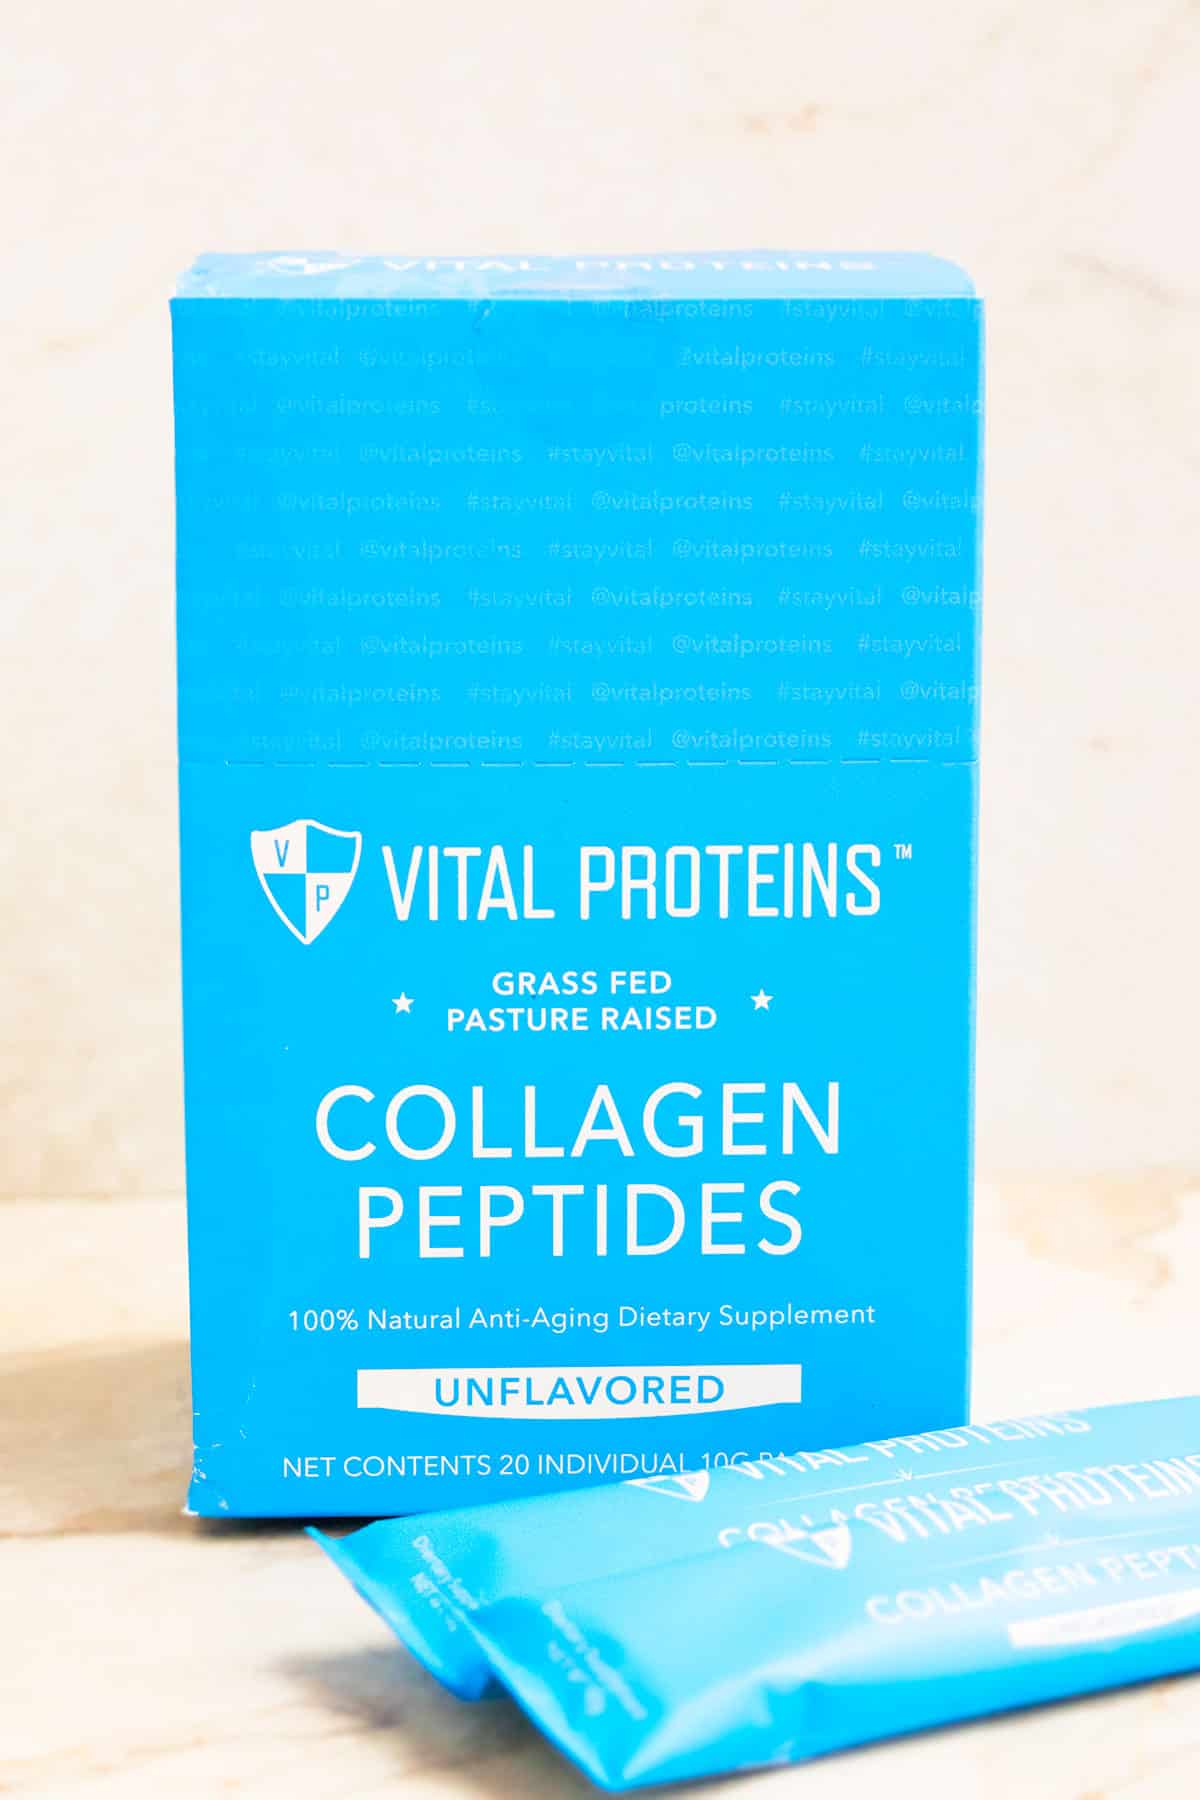 Blue Box of Vital Proteins Collagen Peptides Packets on White Marble Background. 